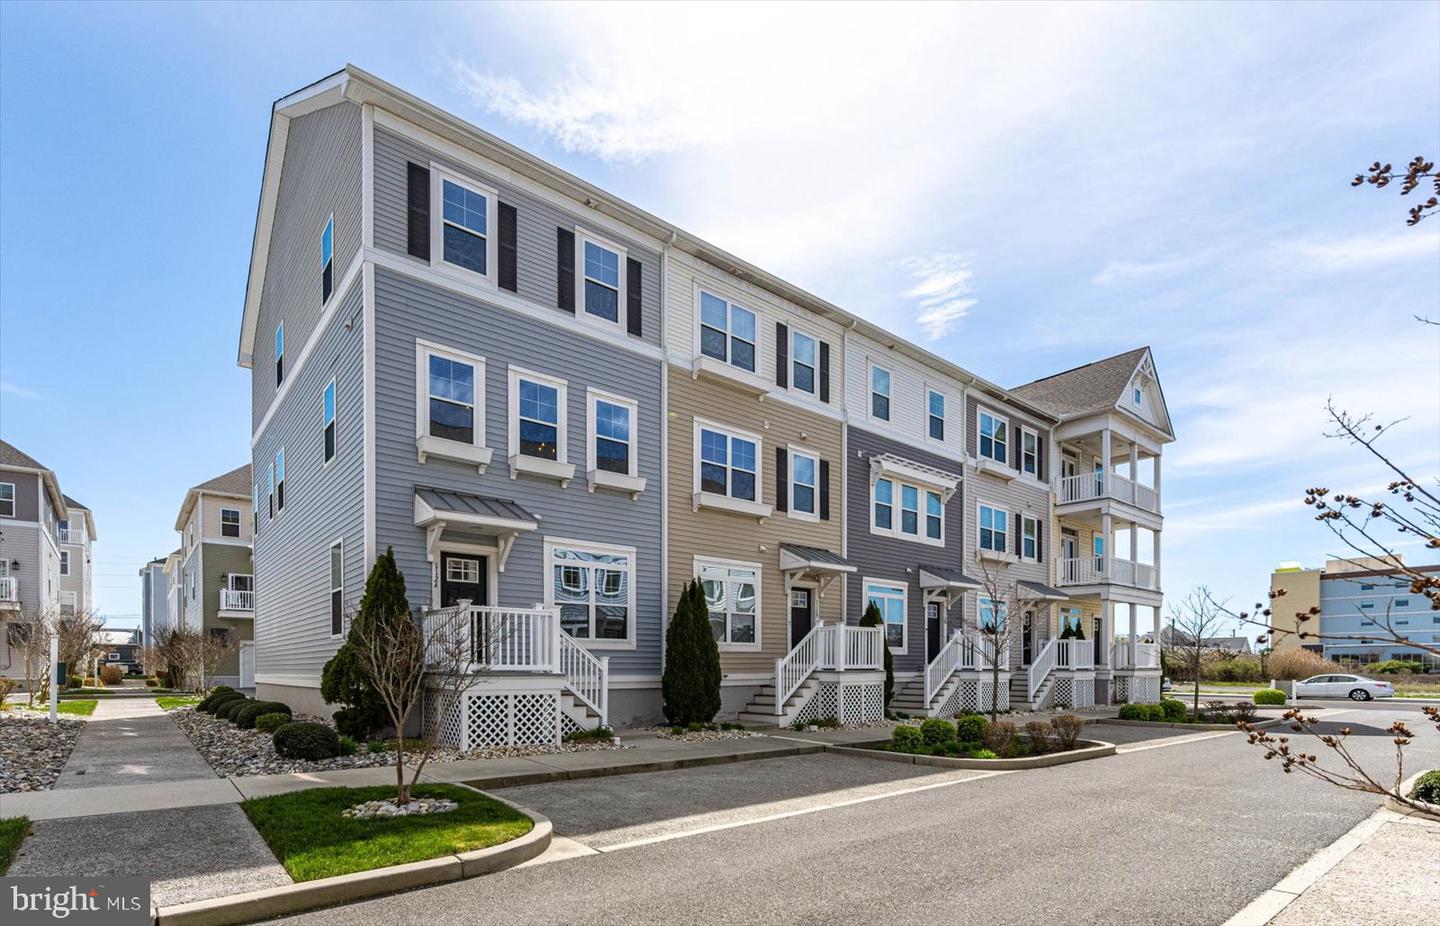 MDWO2020110-802983928334-2024-04-10-17-55-25 112 69th St #a | Ocean City, MD Real Estate For Sale | MLS# Mdwo2020110  - 1st Choice Properties